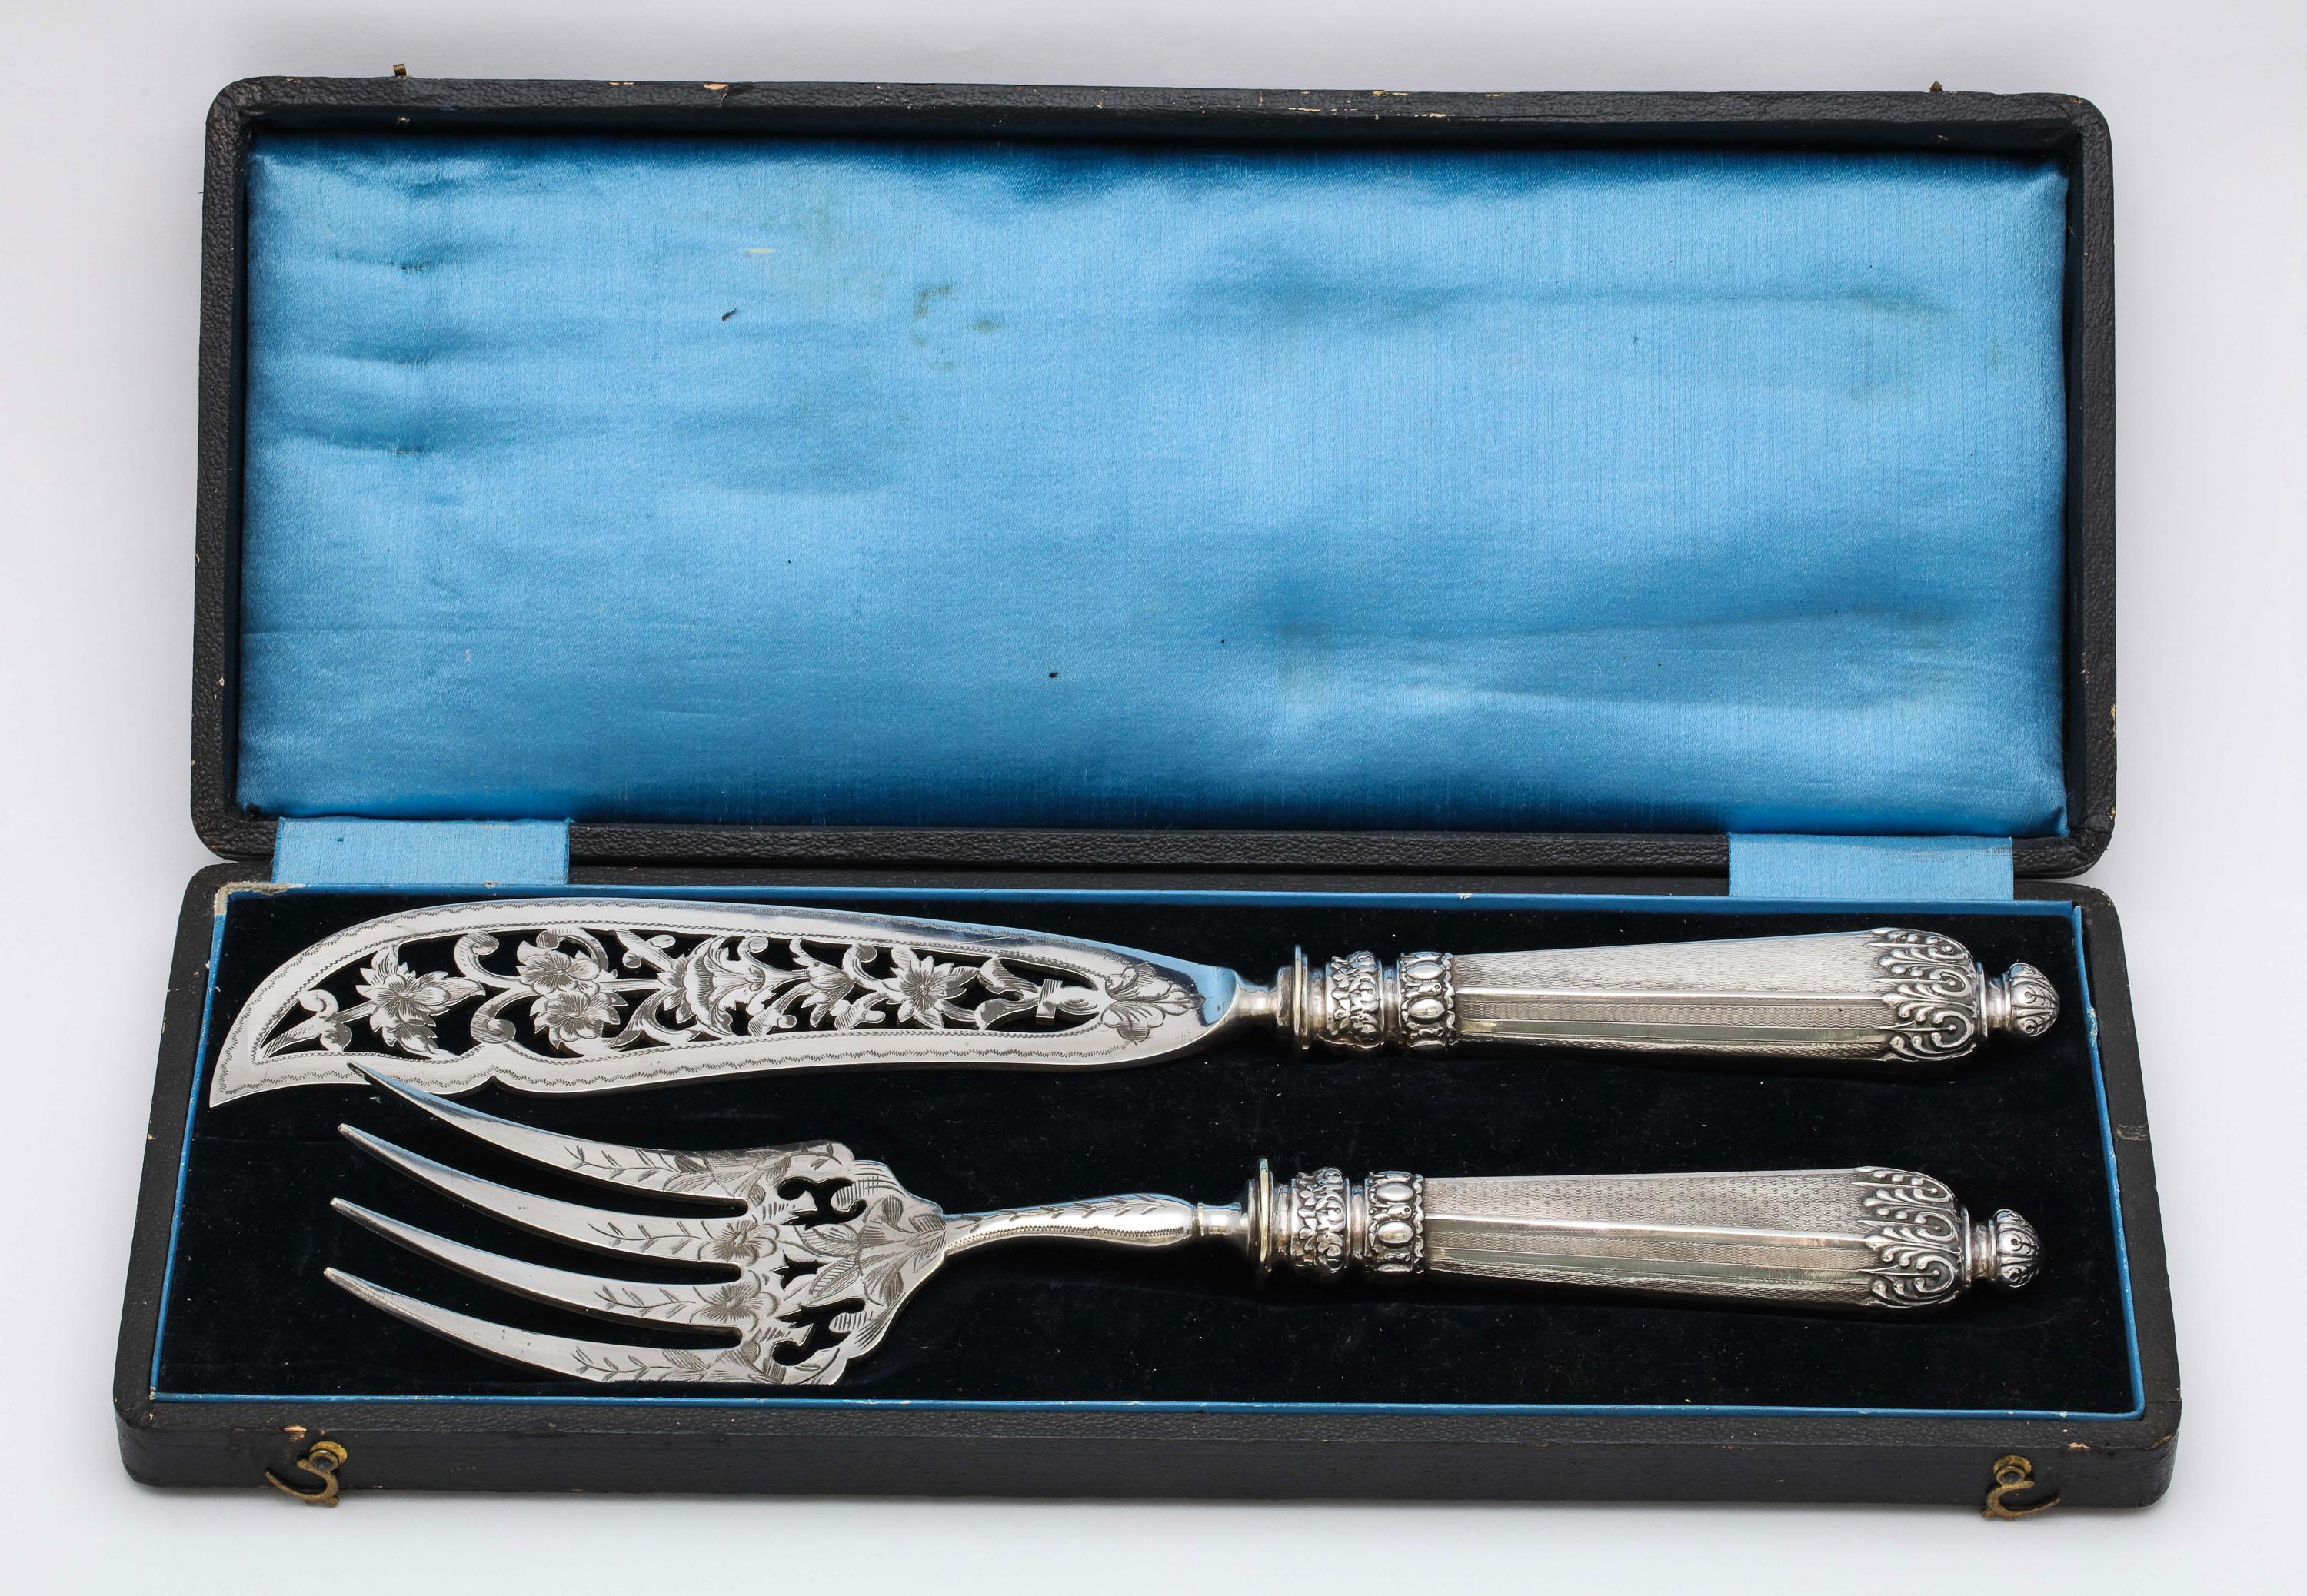 Empire, French, sterling silver-mounted, two-piece fish serving set in original box, Paris, circa 1875. Monogrammed with a script letter B. Original box (which comes with the set) has the same gilt letter B monogram on its lid. Fish serving knife